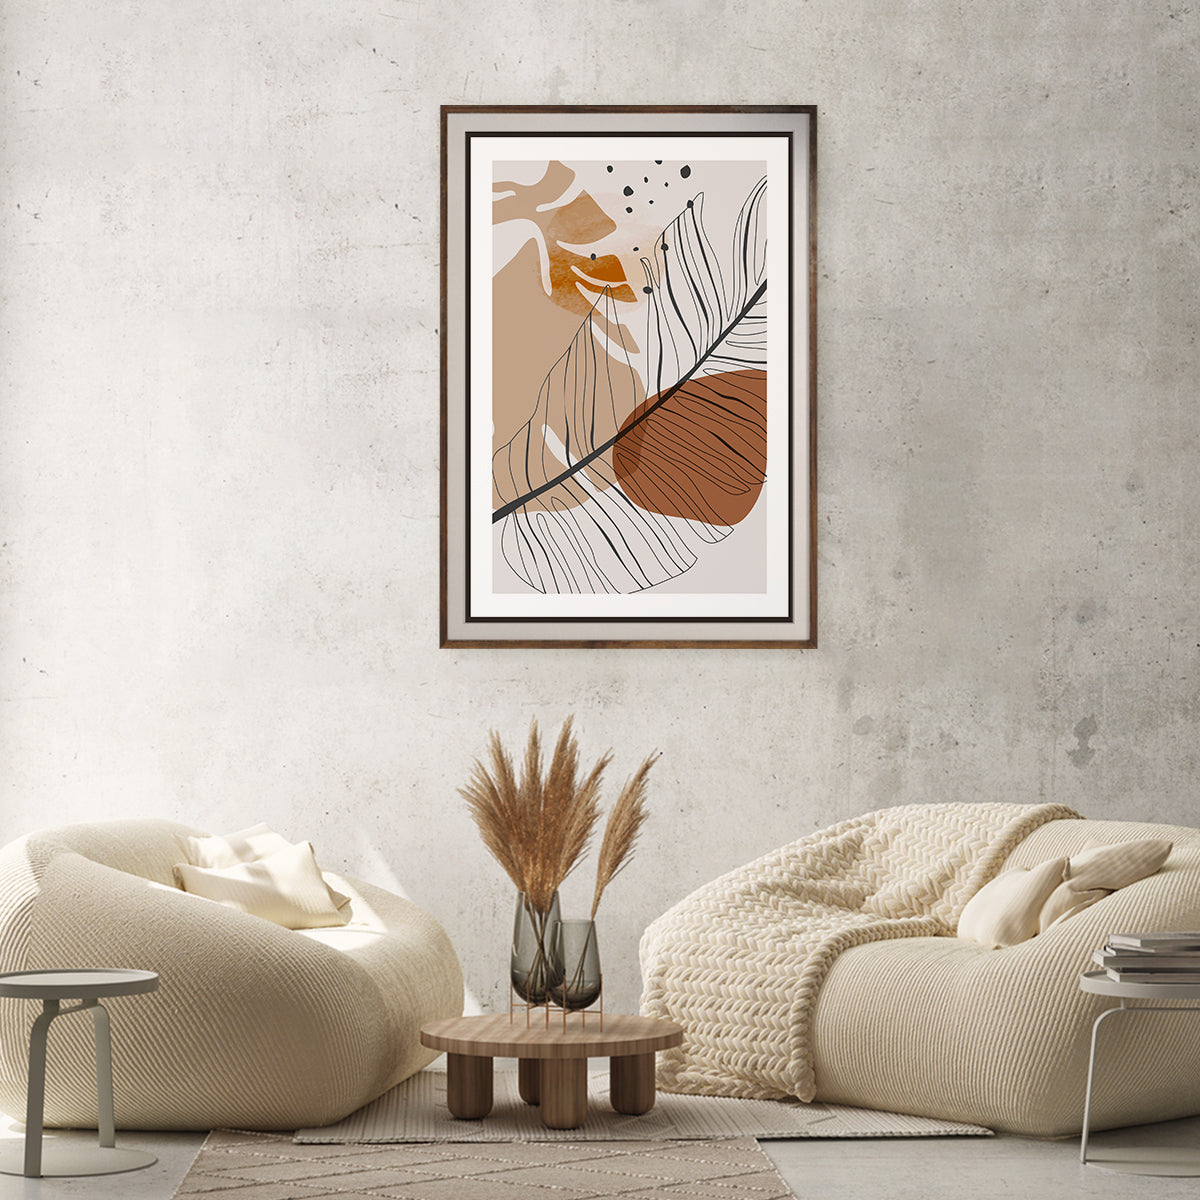 Abstract Leaves Minimalist Posters For Room Wall Decore-Vertical Posters NOT FRAMED-CetArt-8″x10″ inches-CetArt